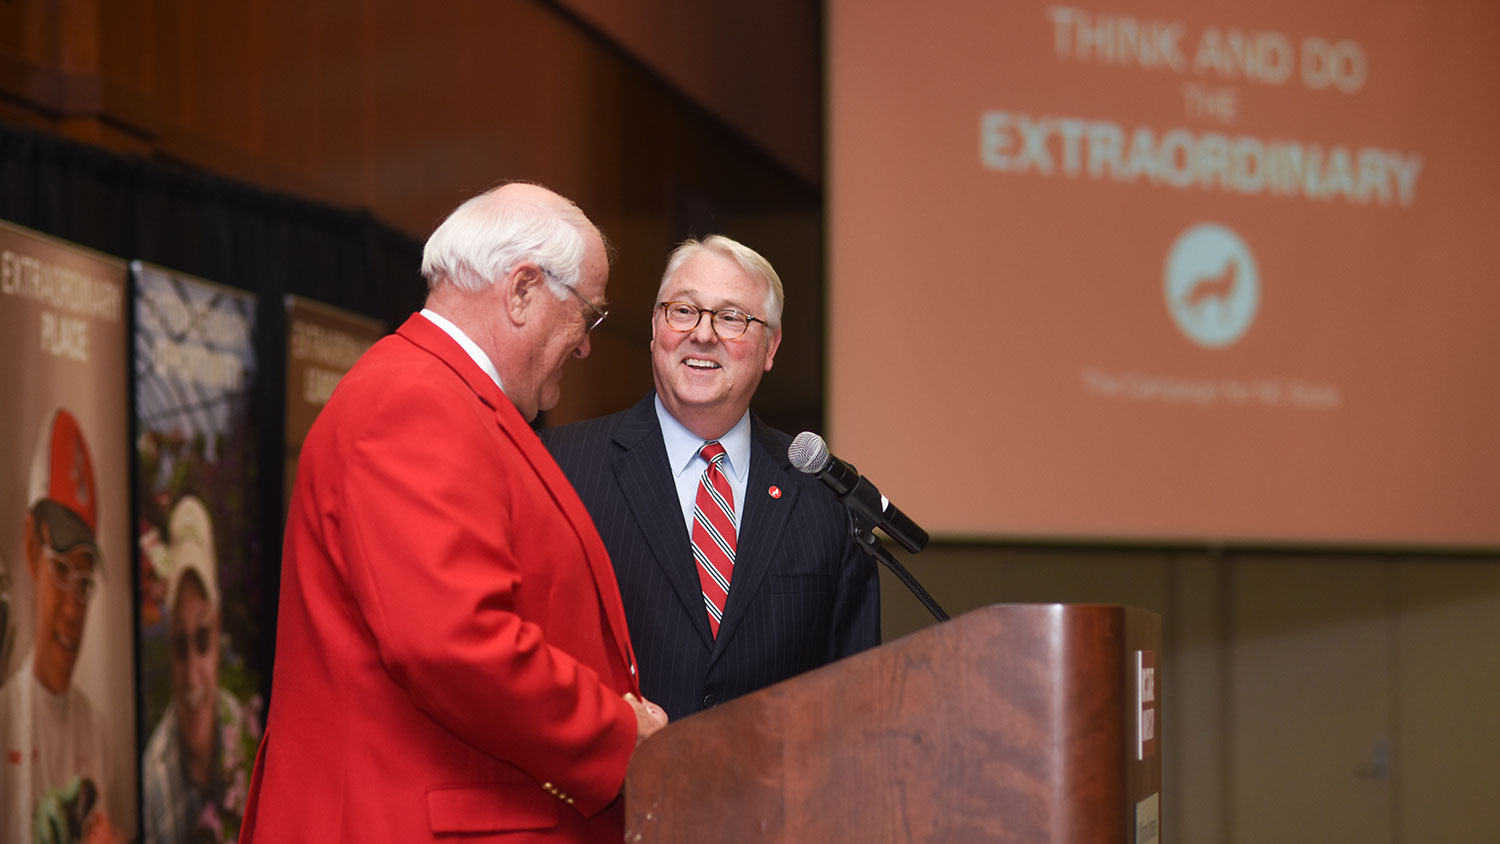 Lawrence Davenport and Chancellor Woodson at the CALS campaign kickoff event